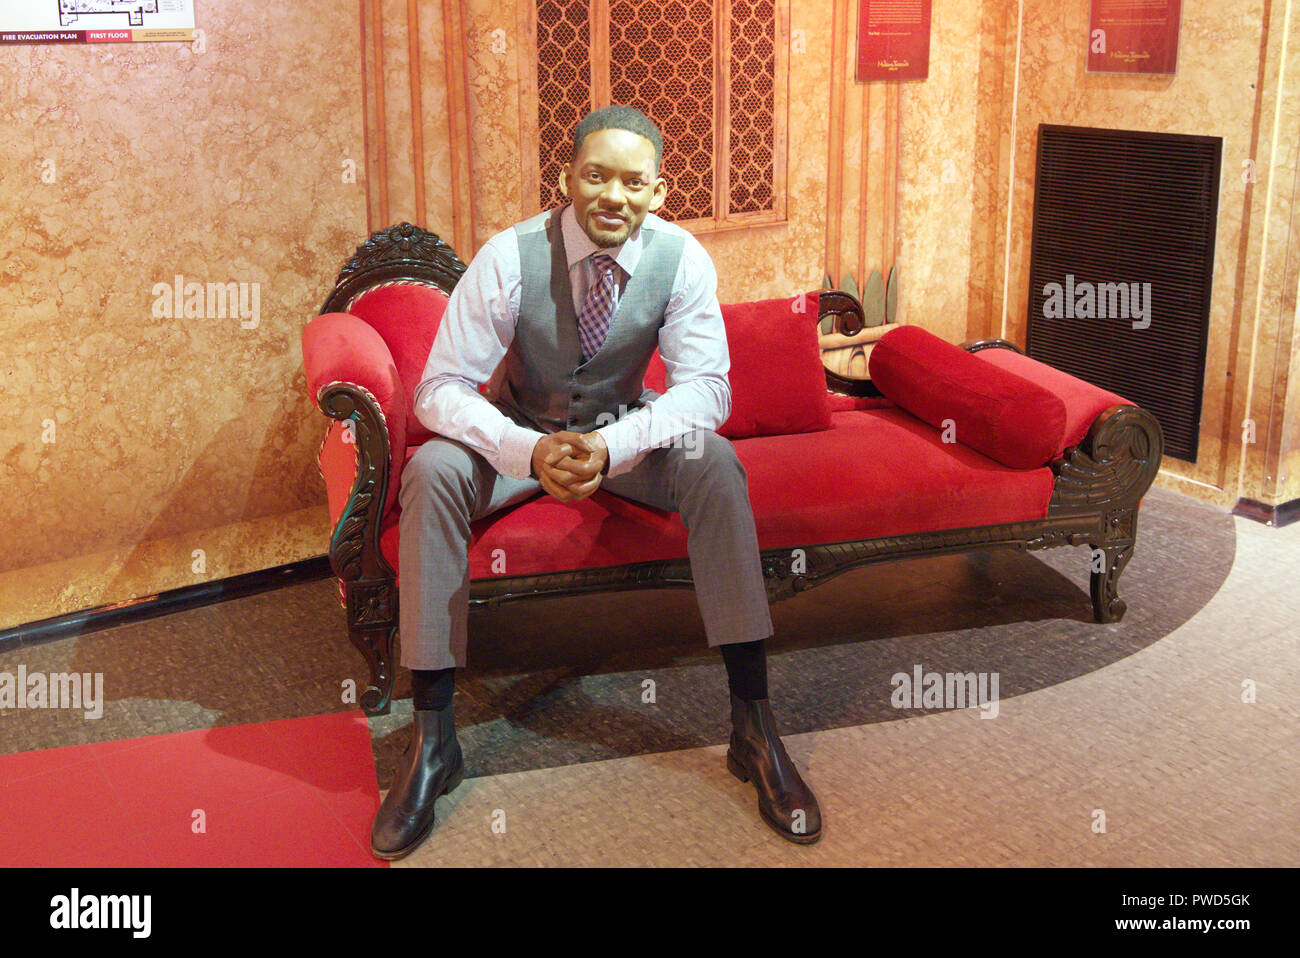 Wax figure of Hollywood actor Will Smith at Madame Tussauds museum, Delhi Stock Photo